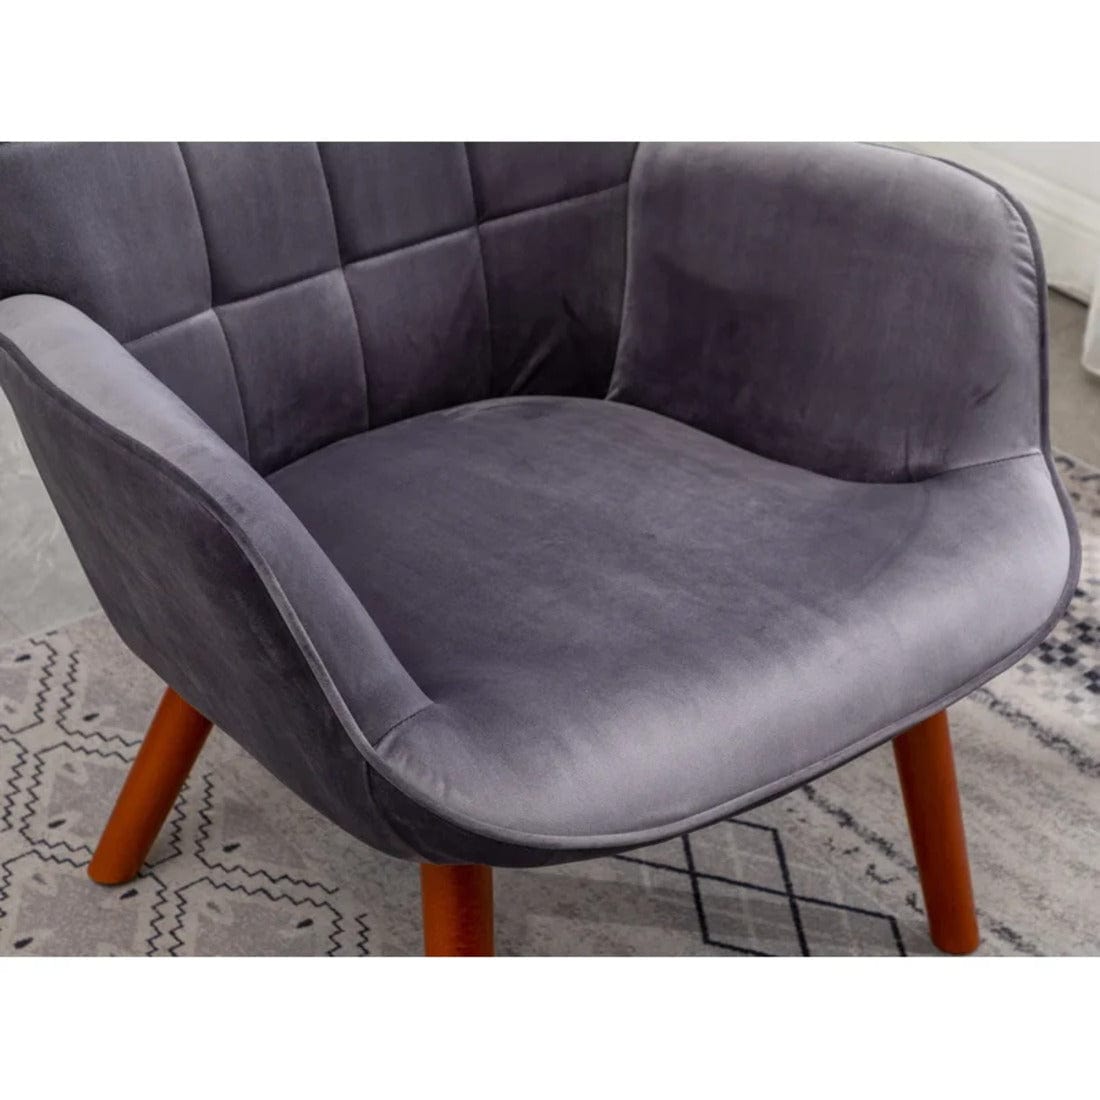 embra accent chair with ottoman